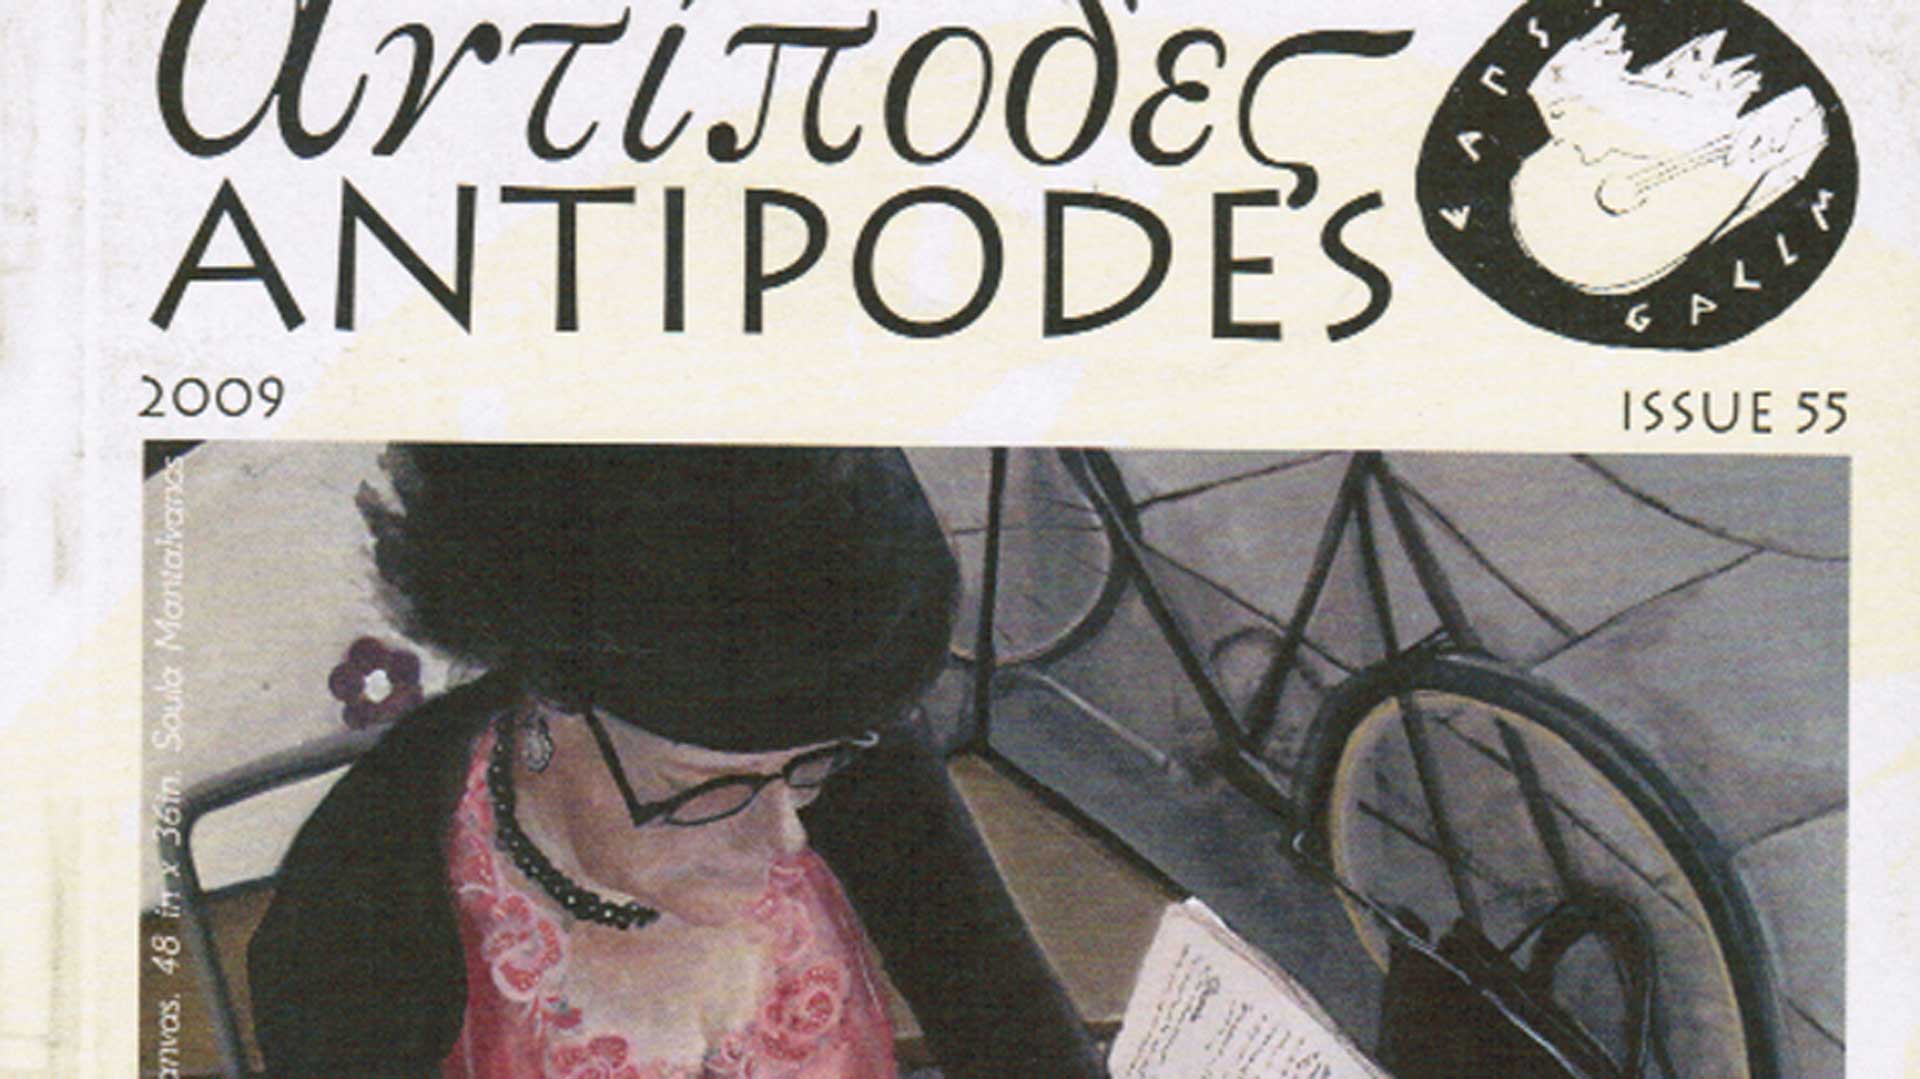 Click on the image to download and read the periodical Antipodes in PDF format